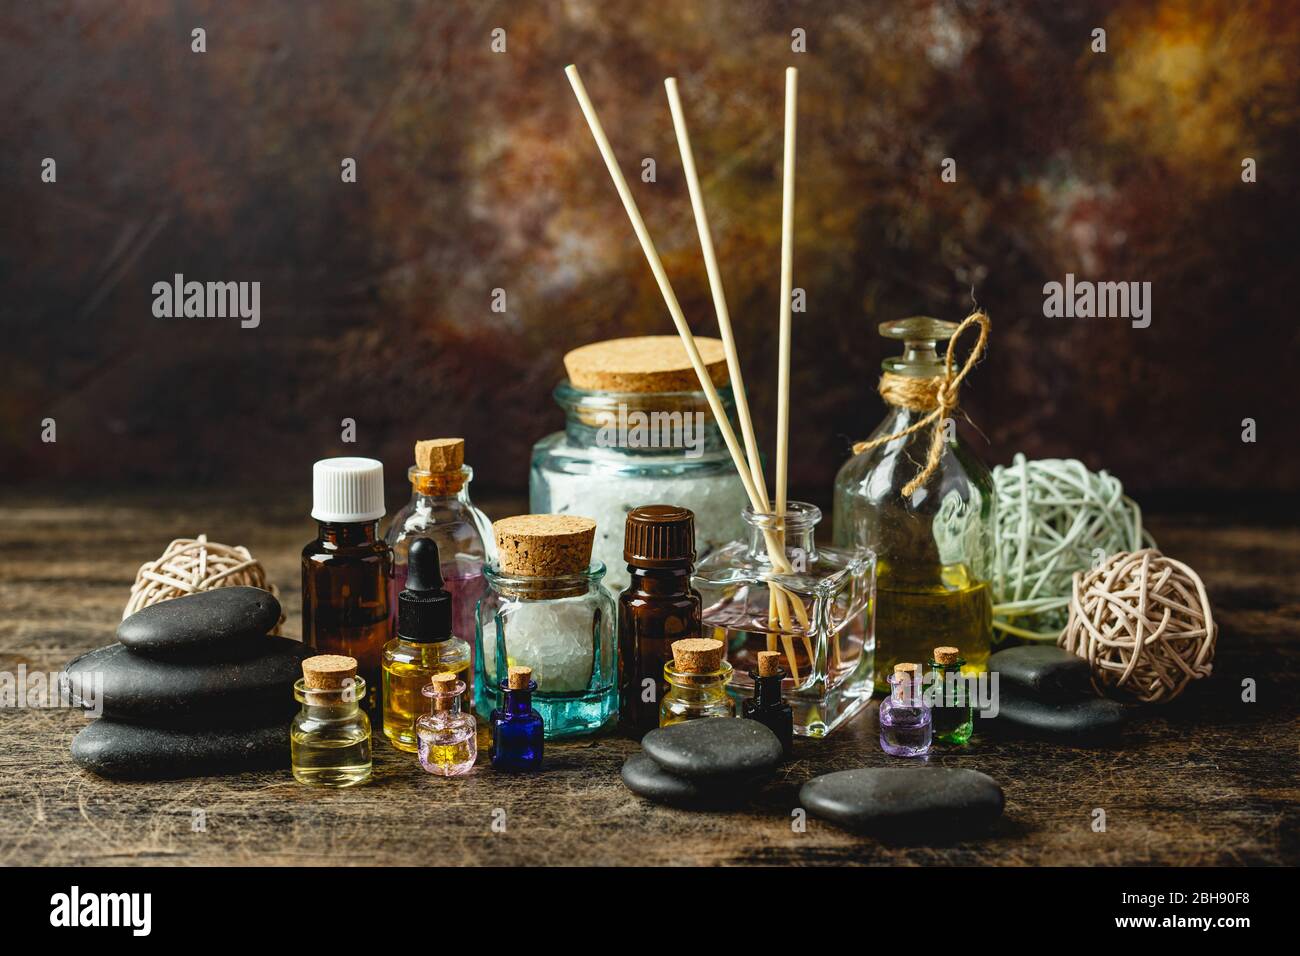 Glass bottles aroma oil and zen stones on wooden table. Spa Treatment Stock Photo